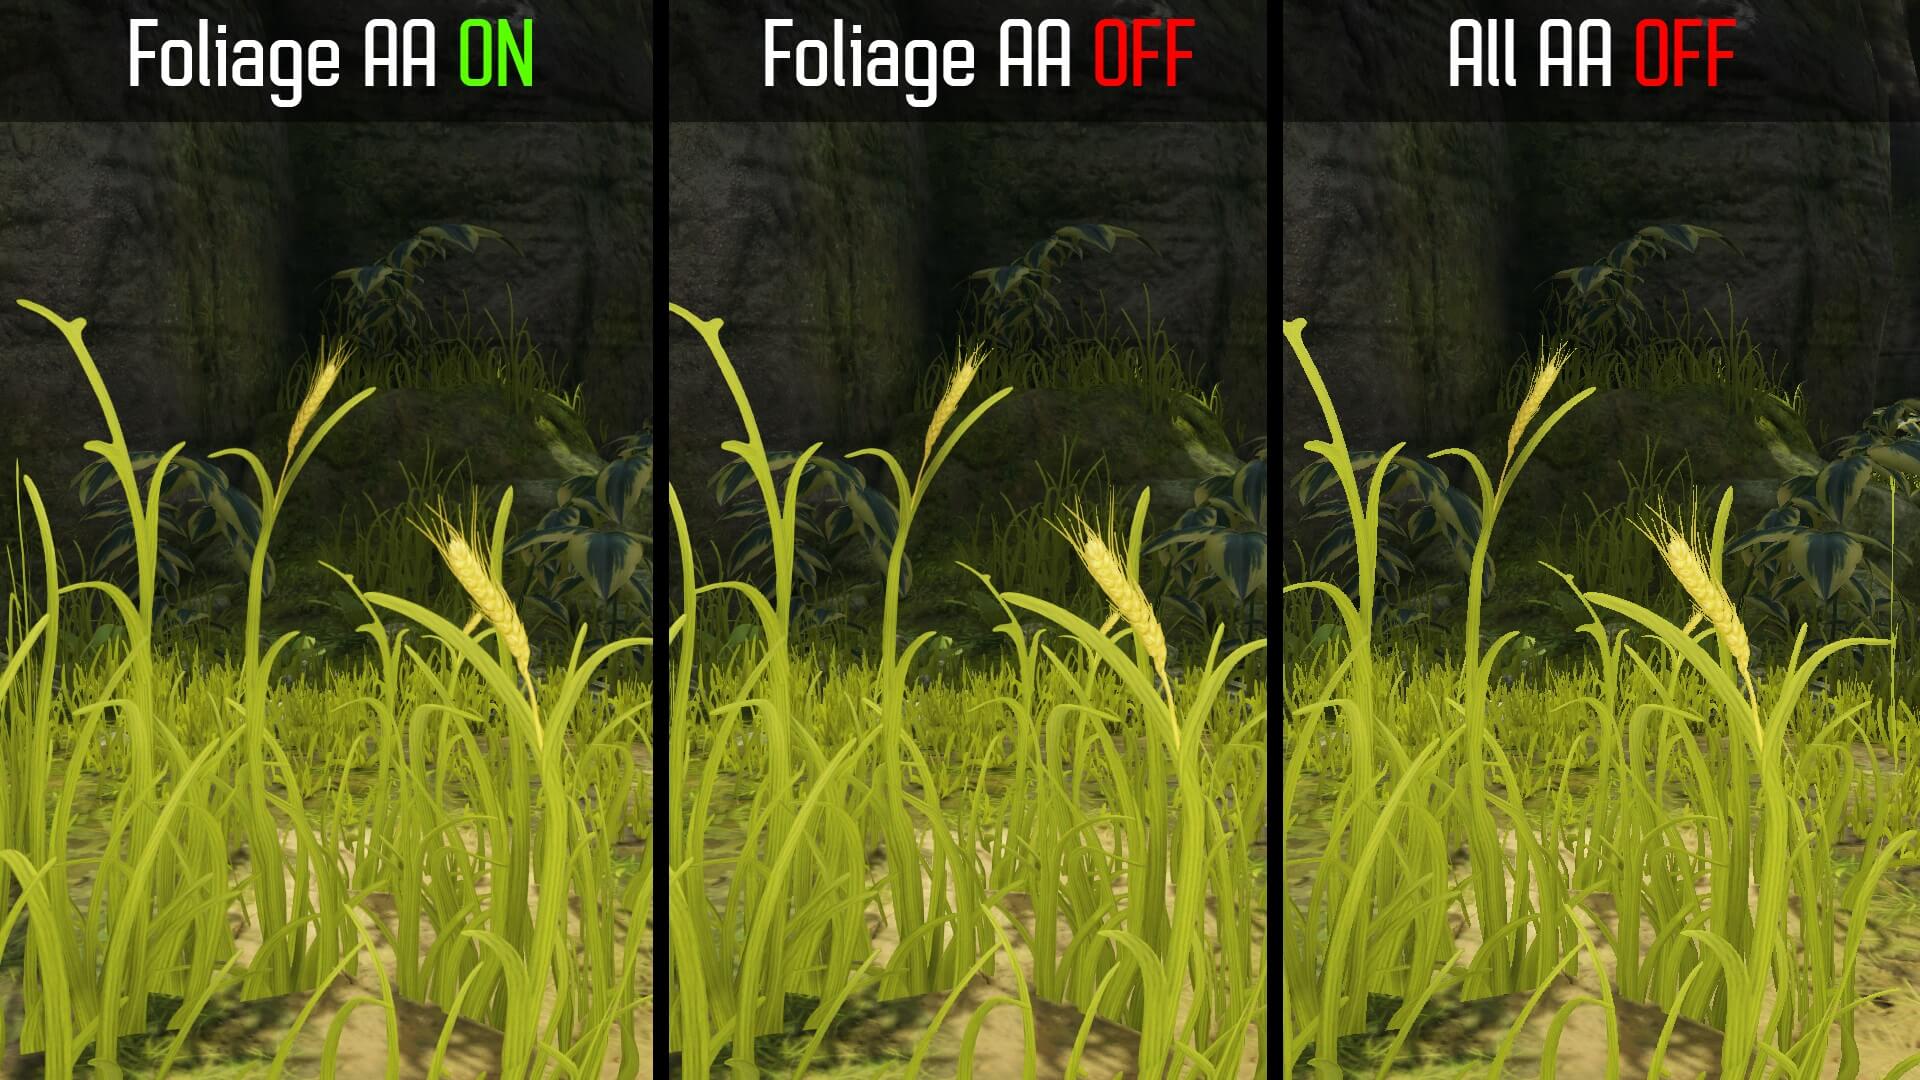 A field of foliage comparing all anti-aliasing off to foliage anti-aliasing off to all anti-aliasing on